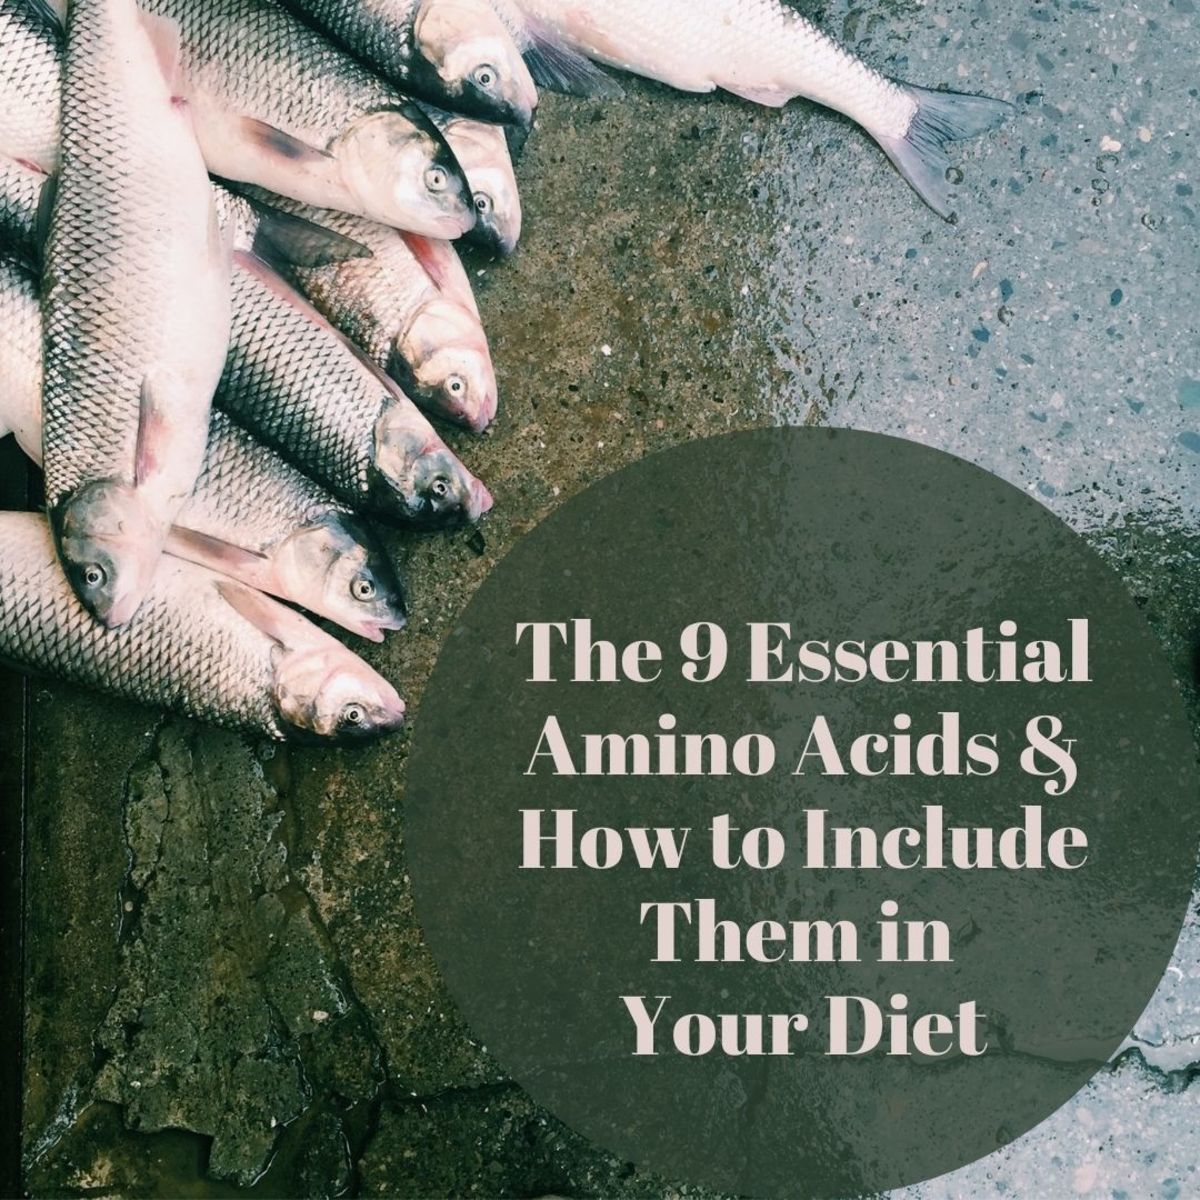 The 9 Essential Amino Acids and Their Importance to Your Body